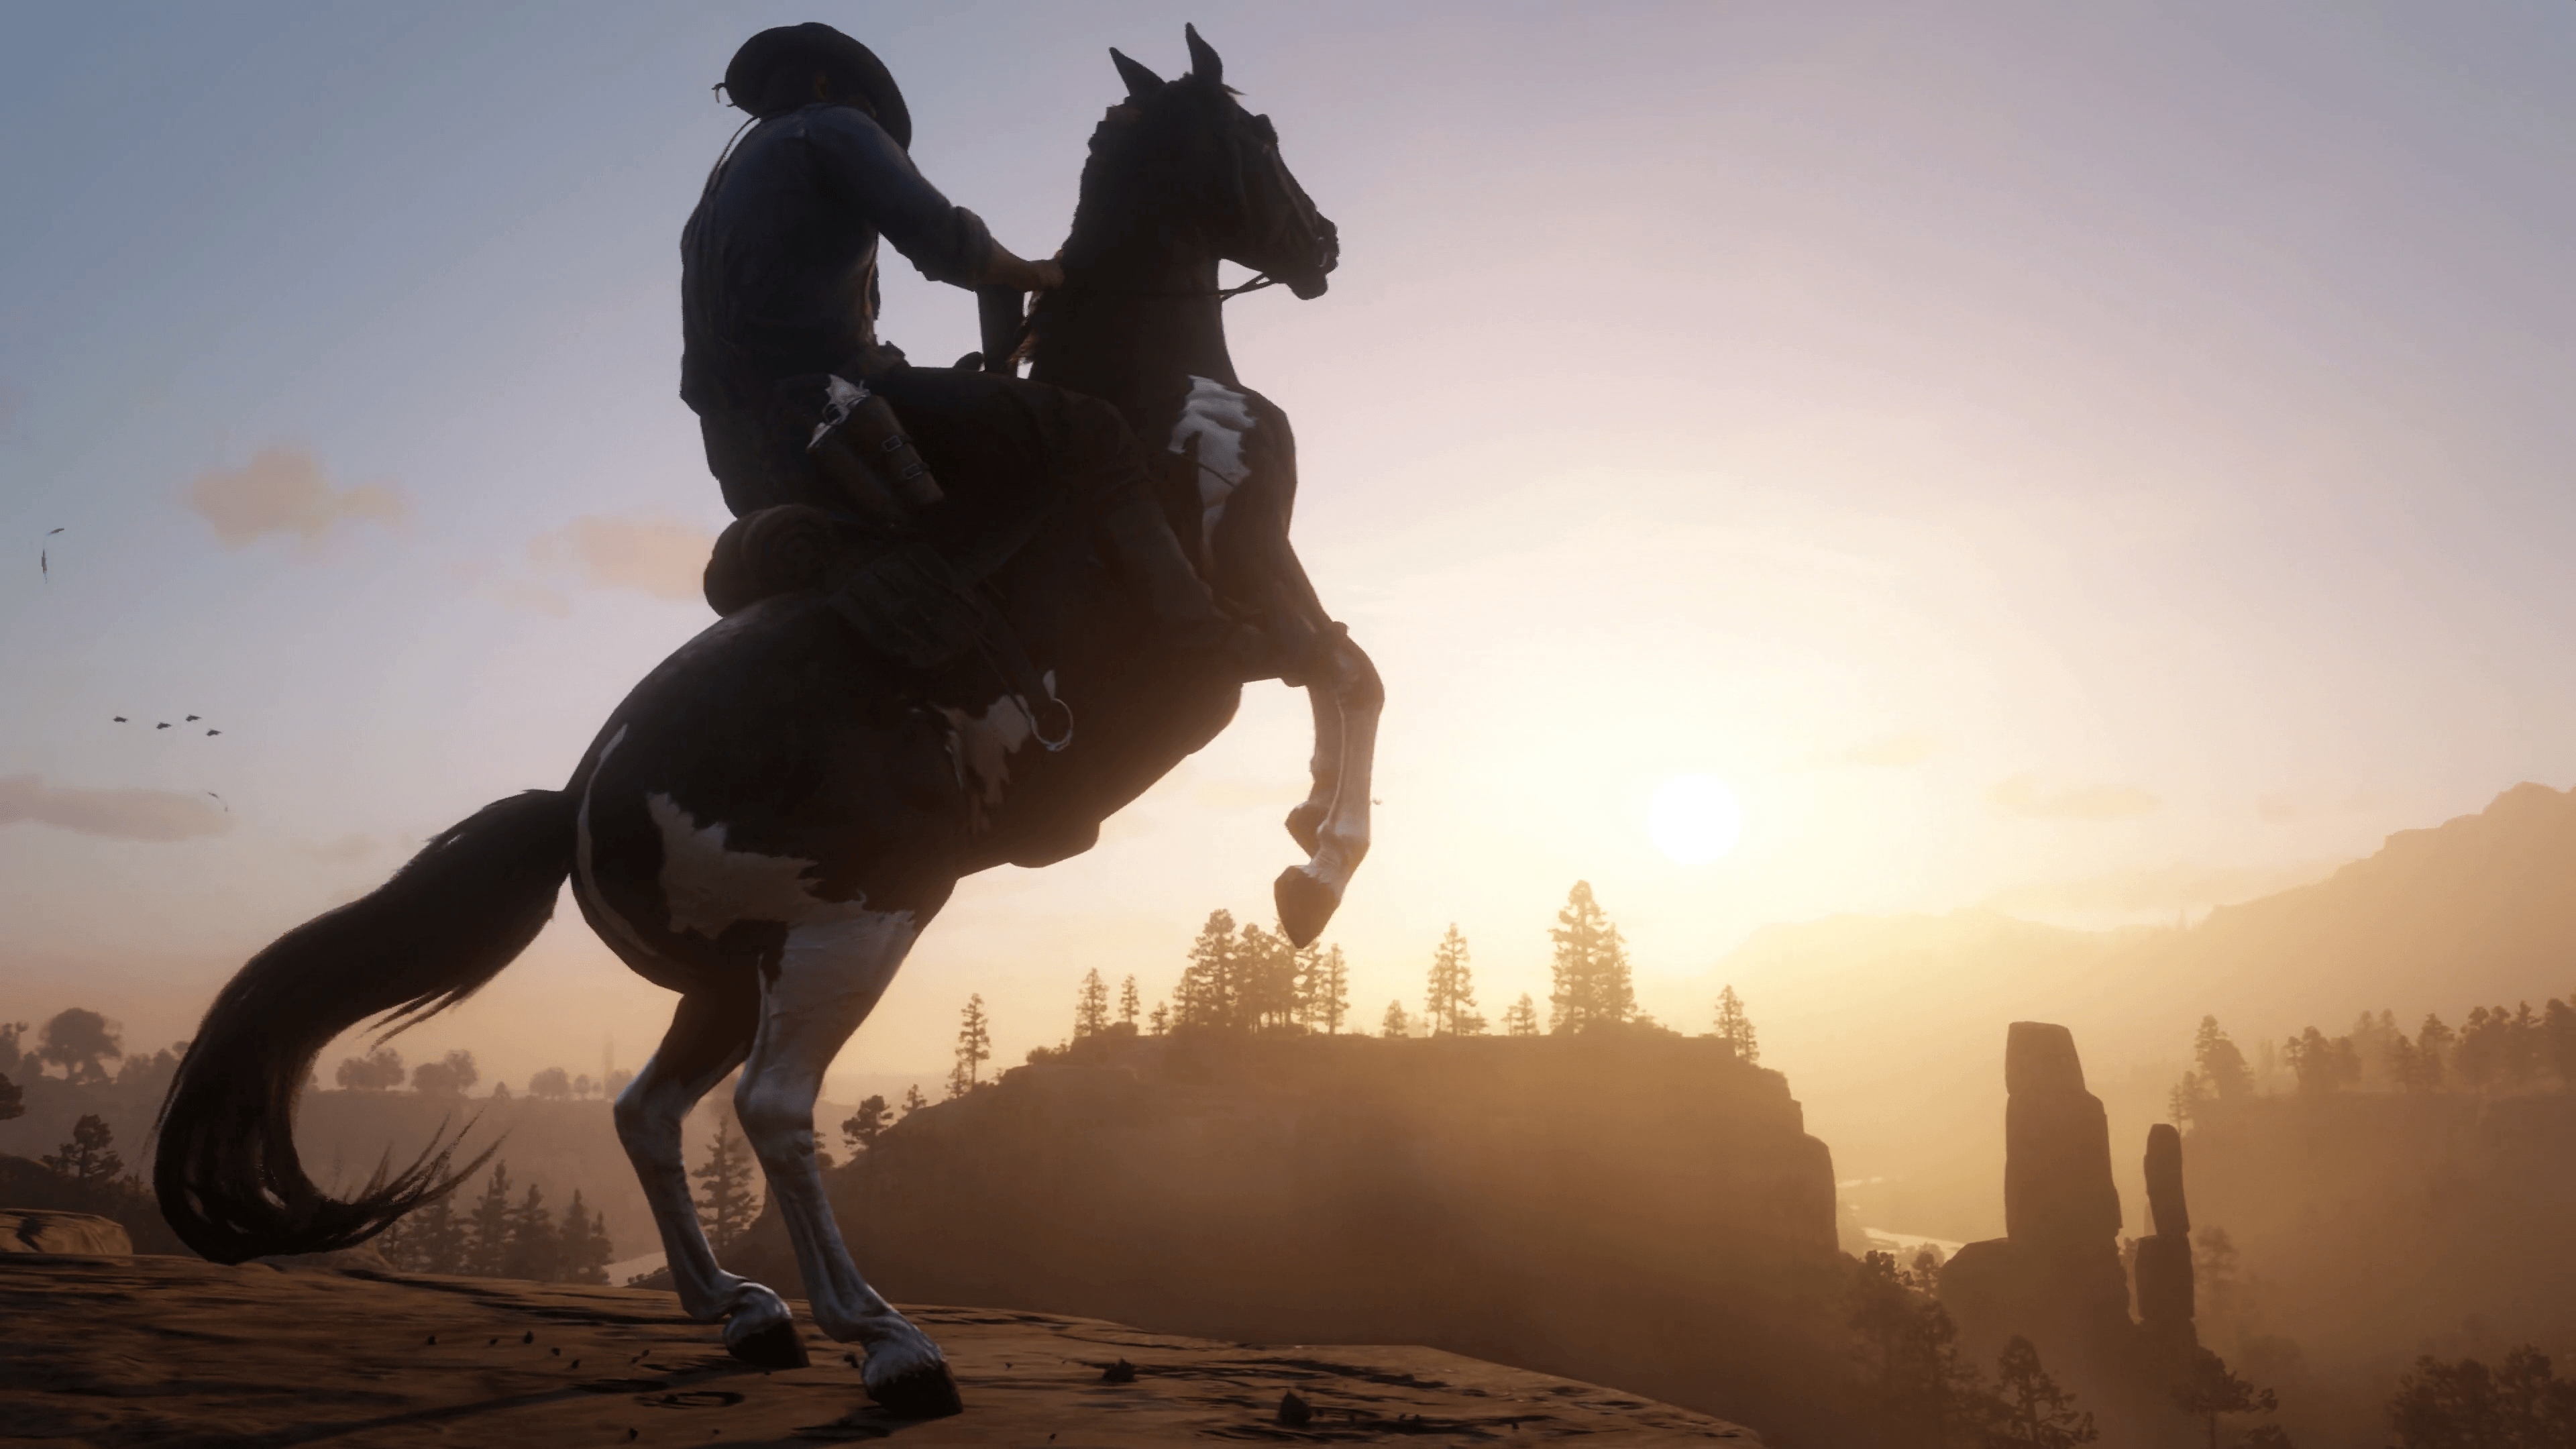 Galloping White Horse Circle Logo - Red Dead Redemption 2 Horse Guide: Tips And Finding One Of The Best